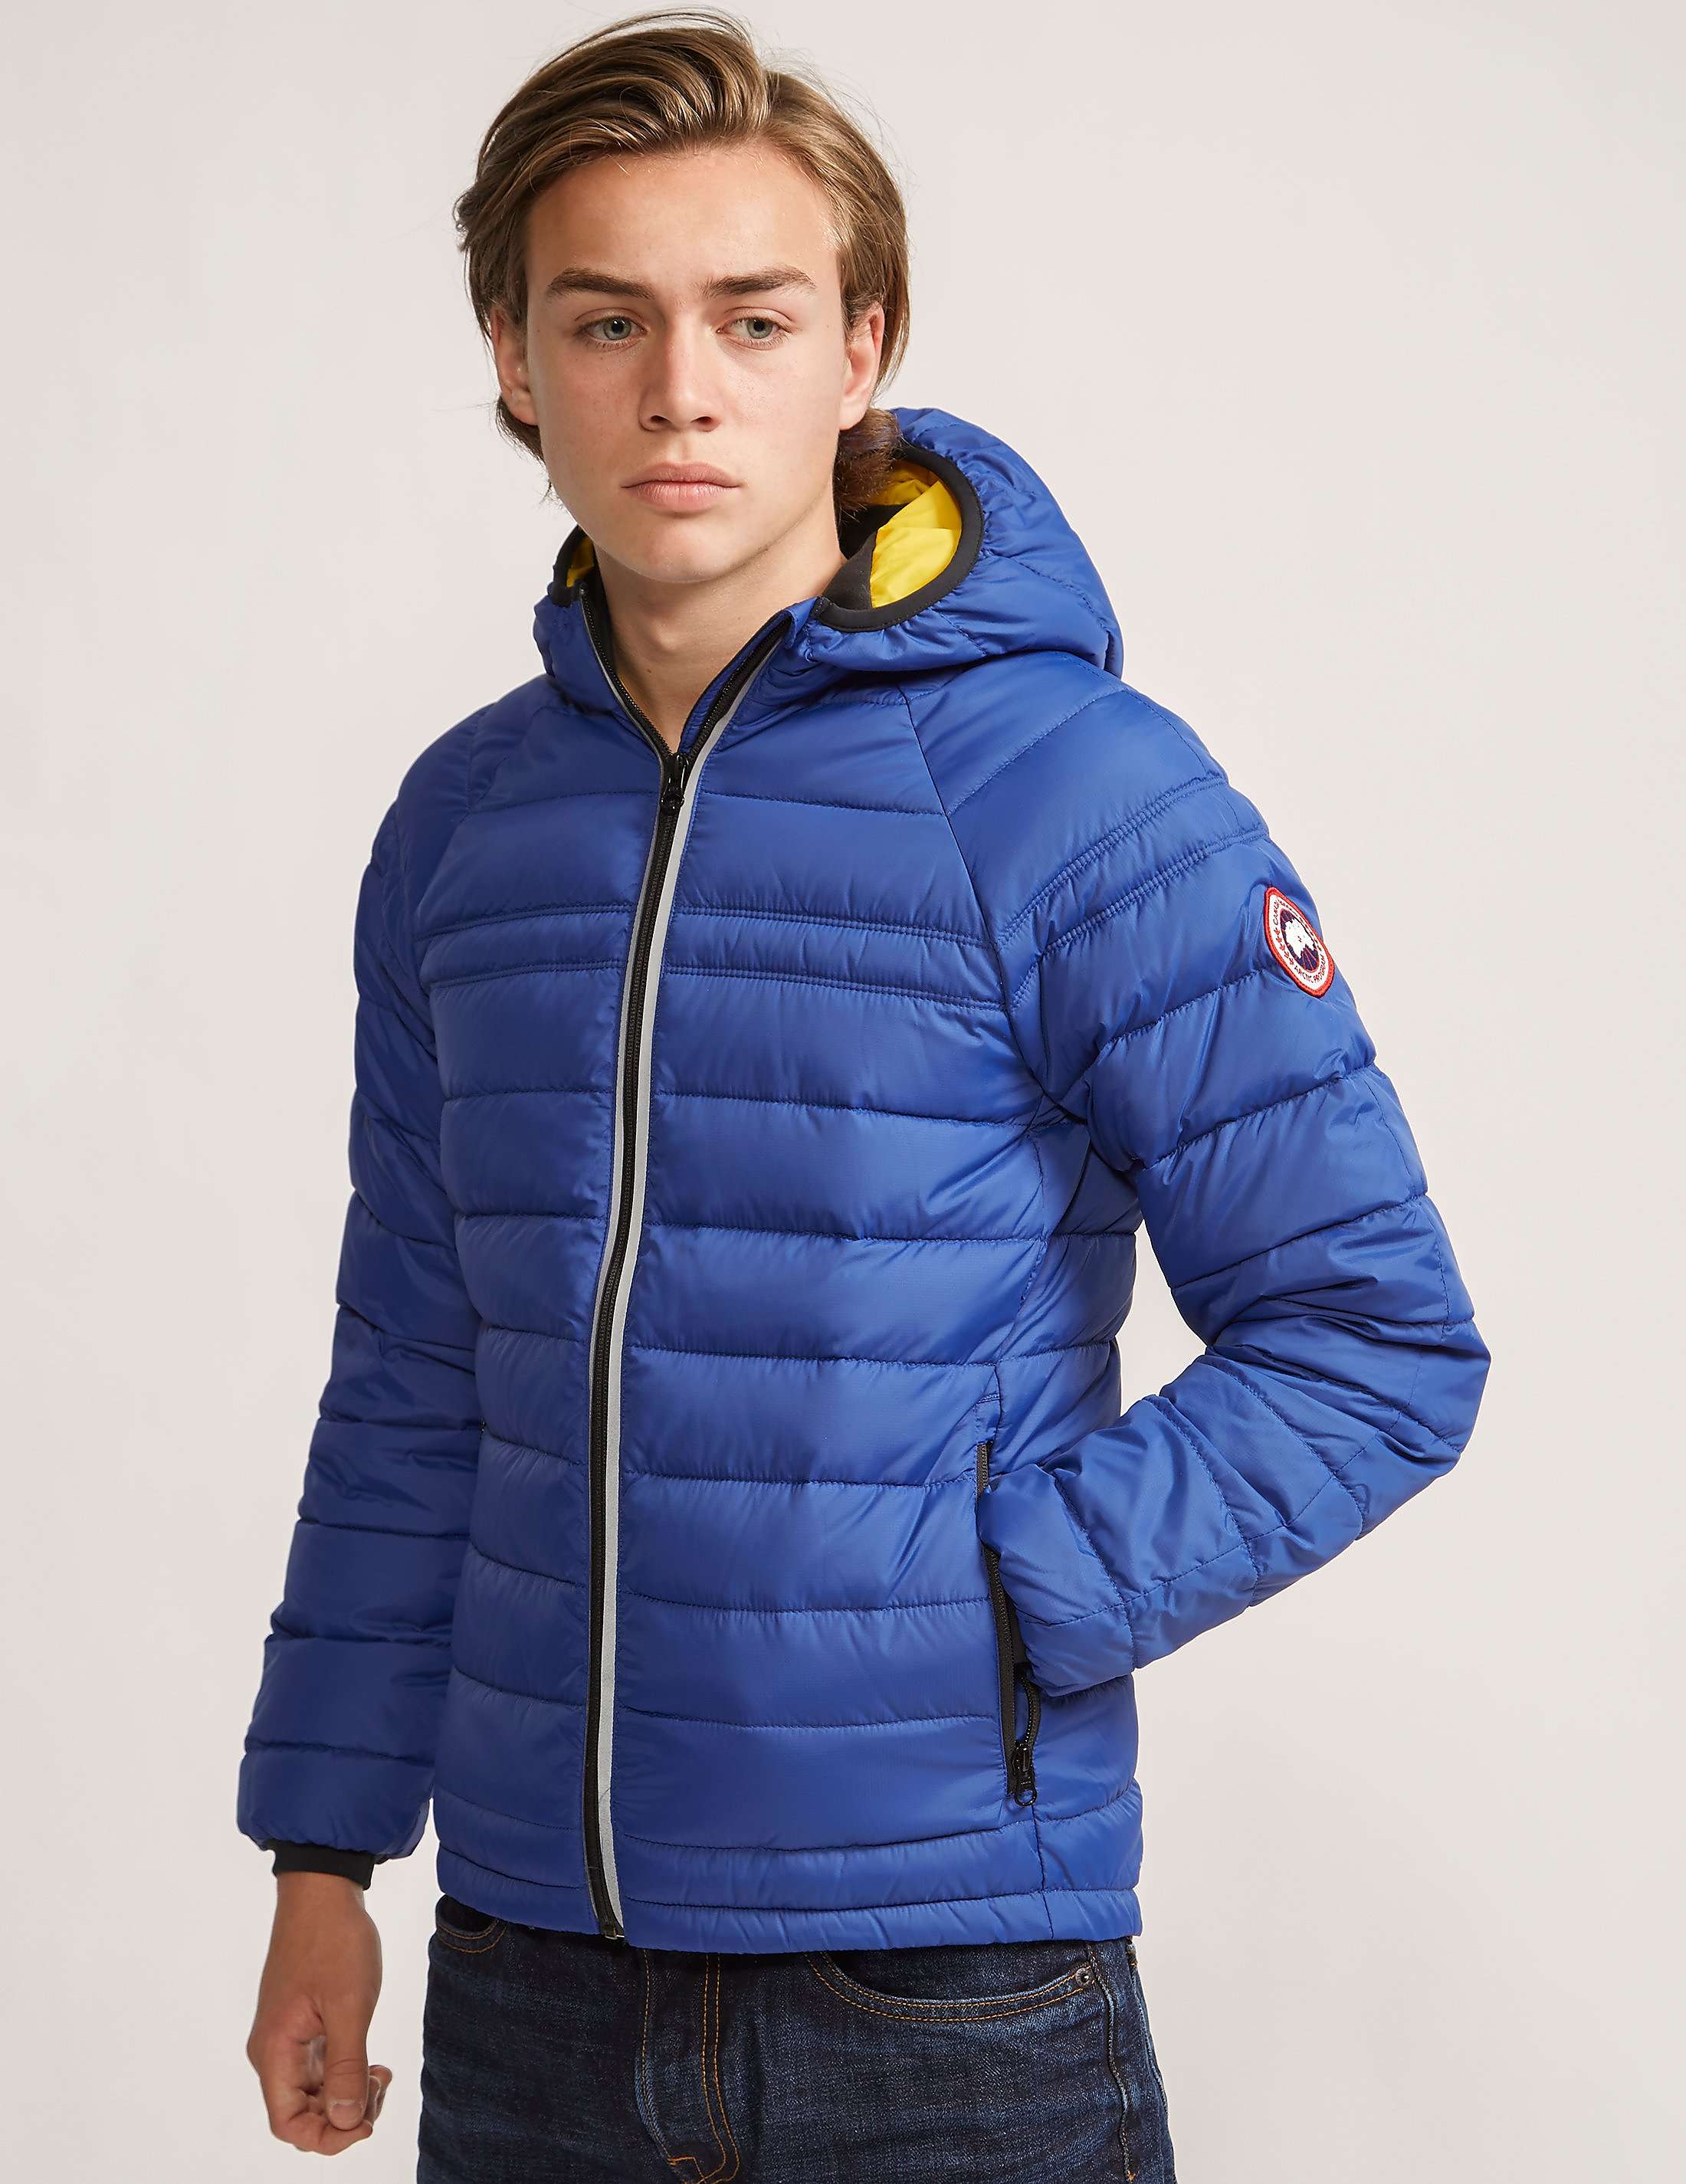 canada goose jackets for kids, Canada Goose hats replica fake